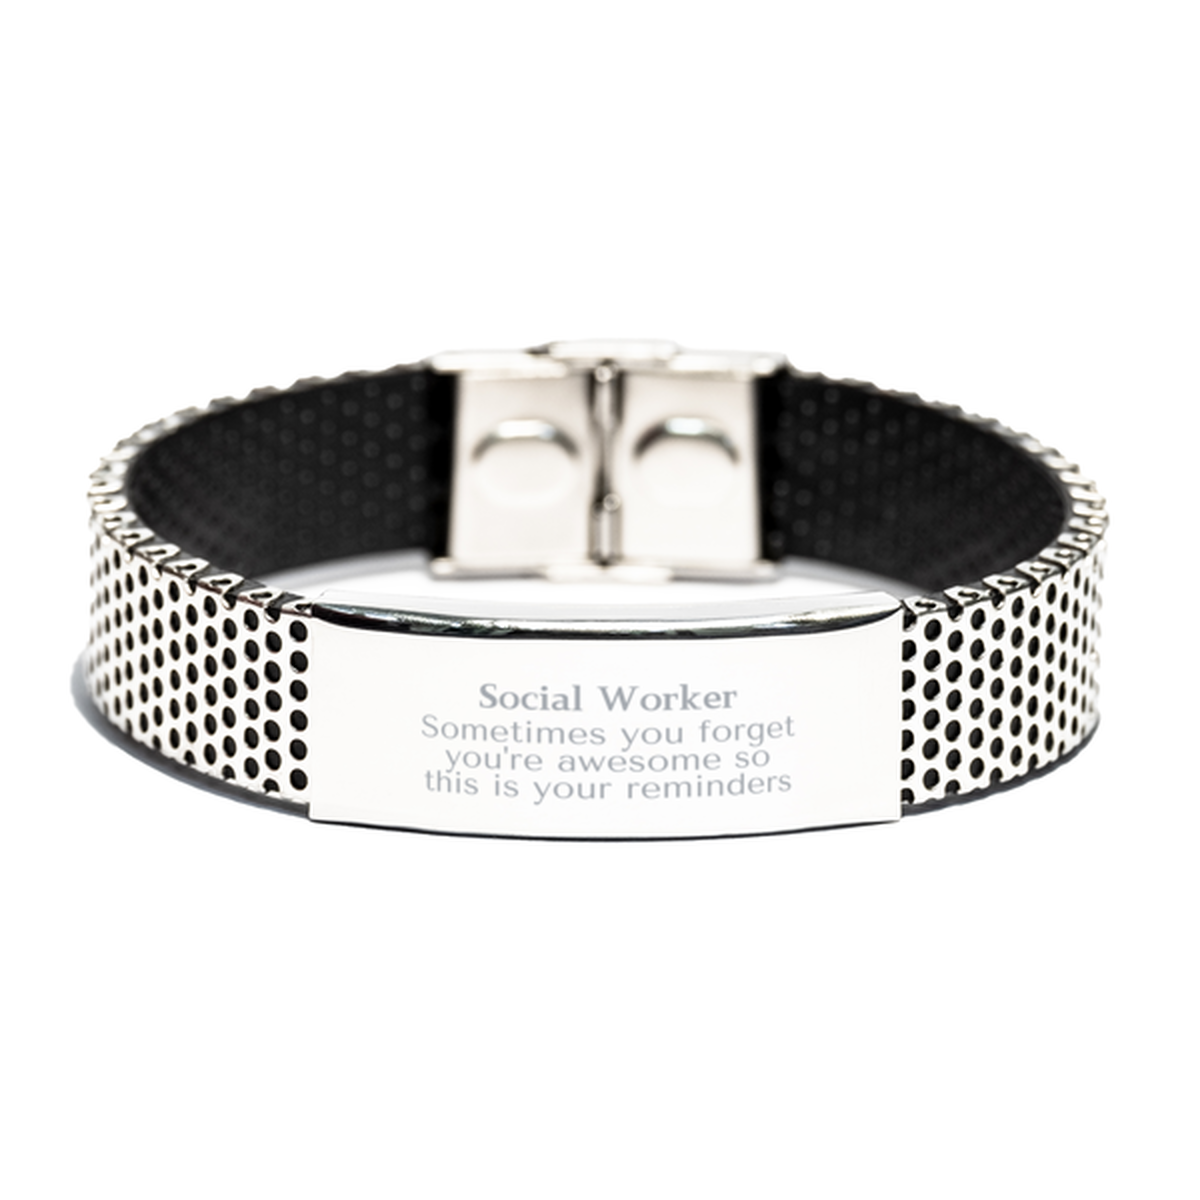 Sentimental Social Worker Stainless Steel Bracelet, Social Worker Sometimes you forget you're awesome so this is your reminders, Graduation Christmas Birthday Gifts for Social Worker, Men, Women, Coworkers